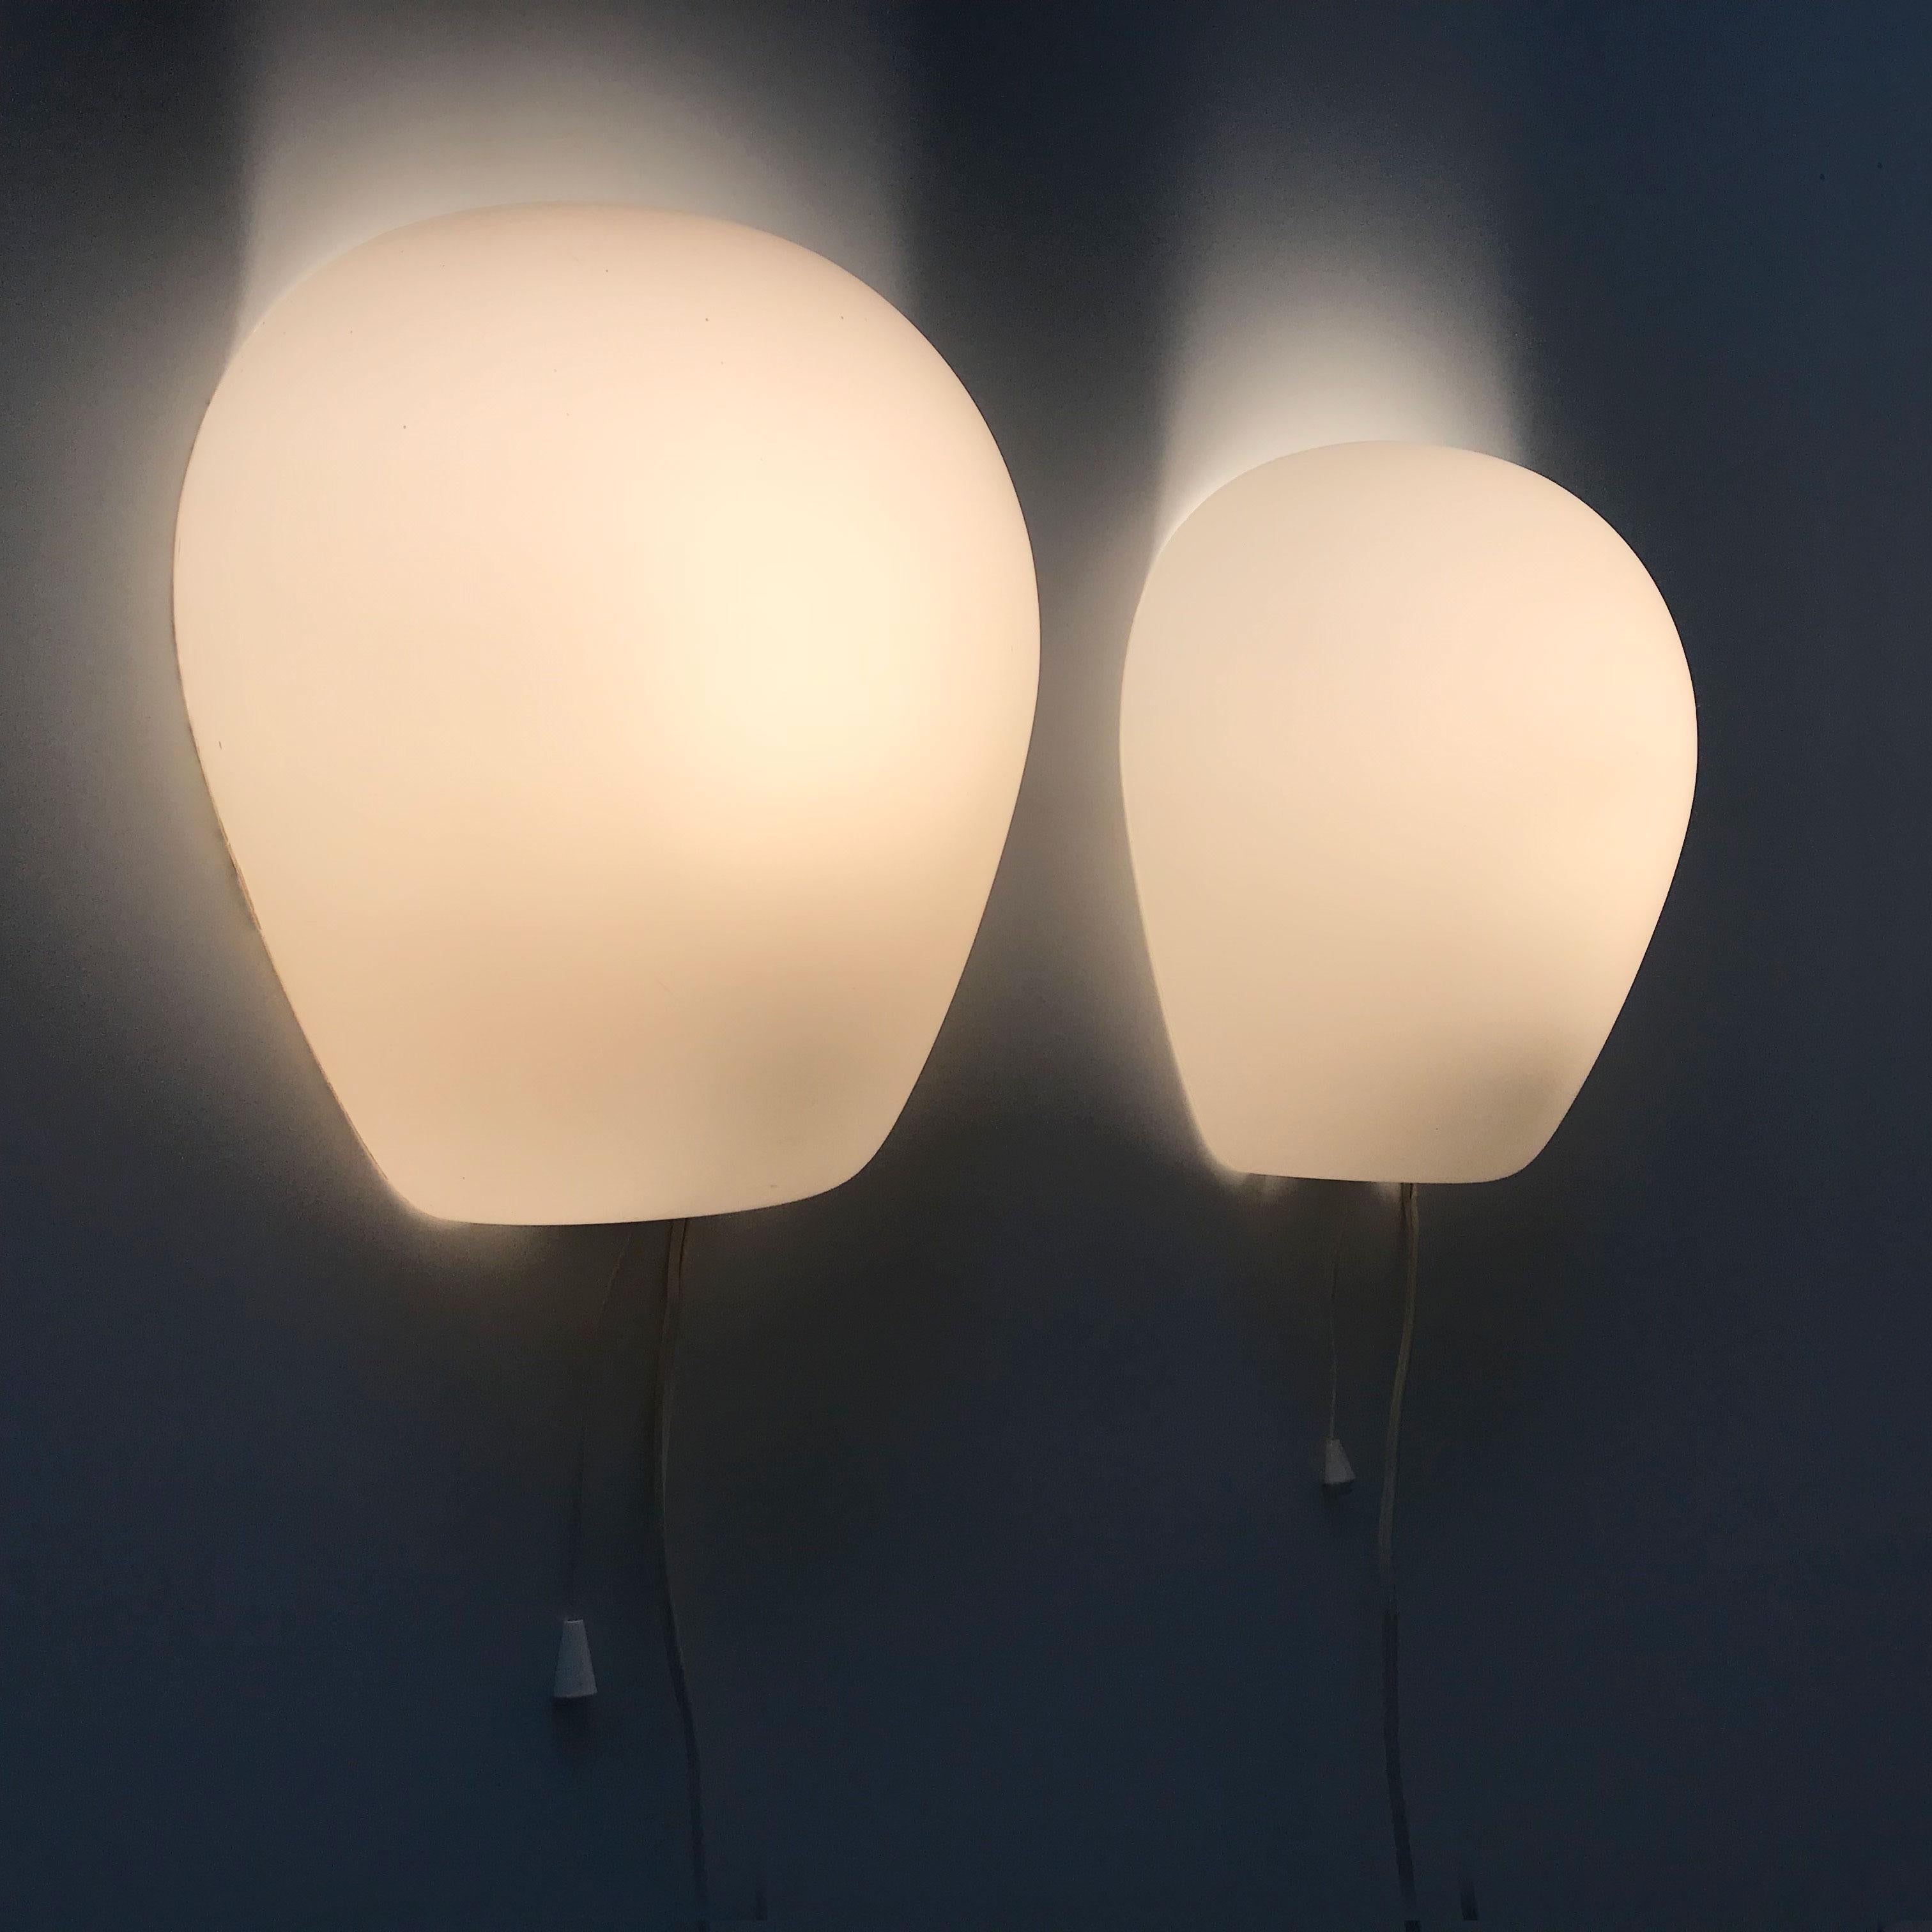 German Set of Two Midcentury Shell Wall Lamps or Sconces by Wilhelm Wagenfeld, 1950s For Sale